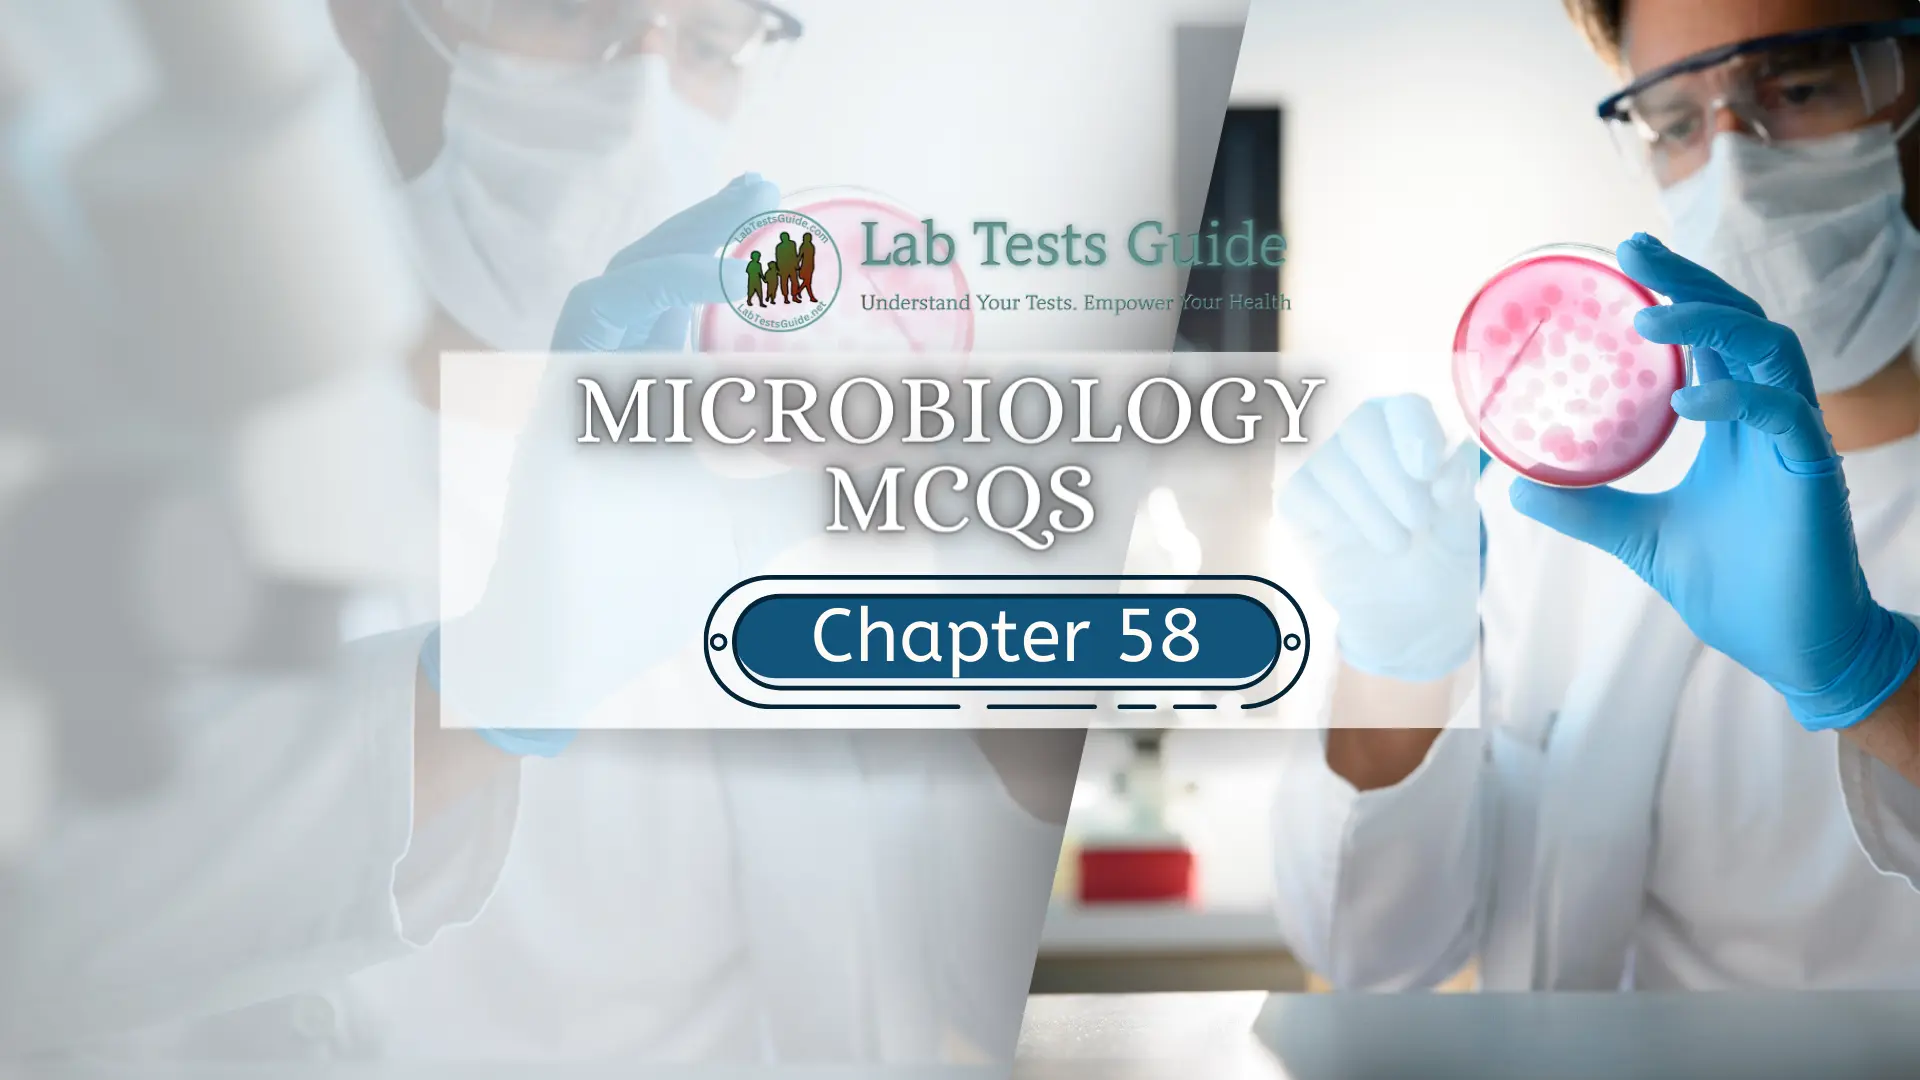 Microbiology MCQs Chapter 58